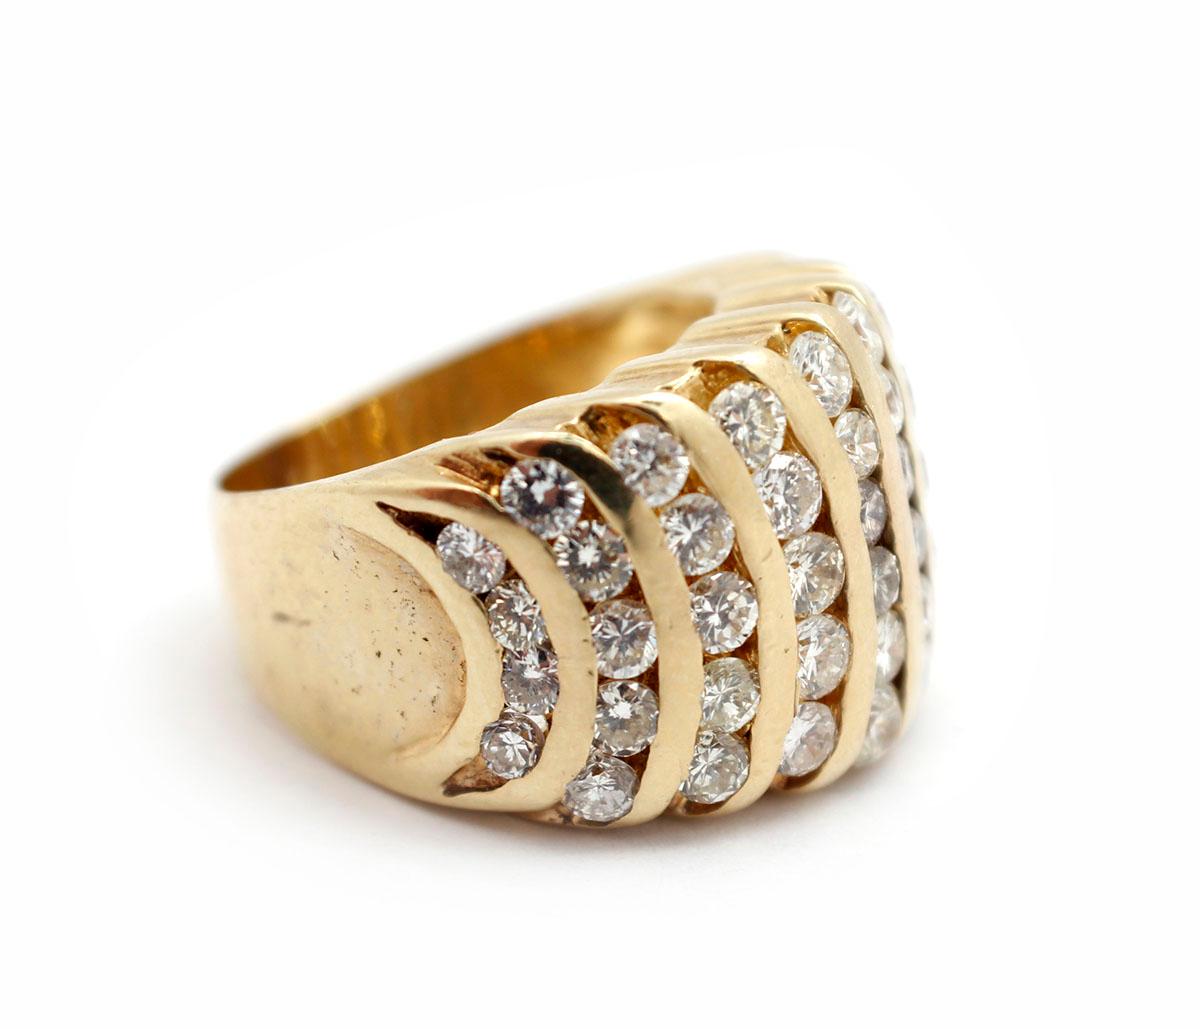 This ring is made in 14k yellow gold, and it holds 10 rows of round brilliant diamonds. There are 50 diamonds in all for an approximate total weight of 2.0 carats. The diamonds are graded H-I-J in color and SI in clarity. The ring measures 14mm